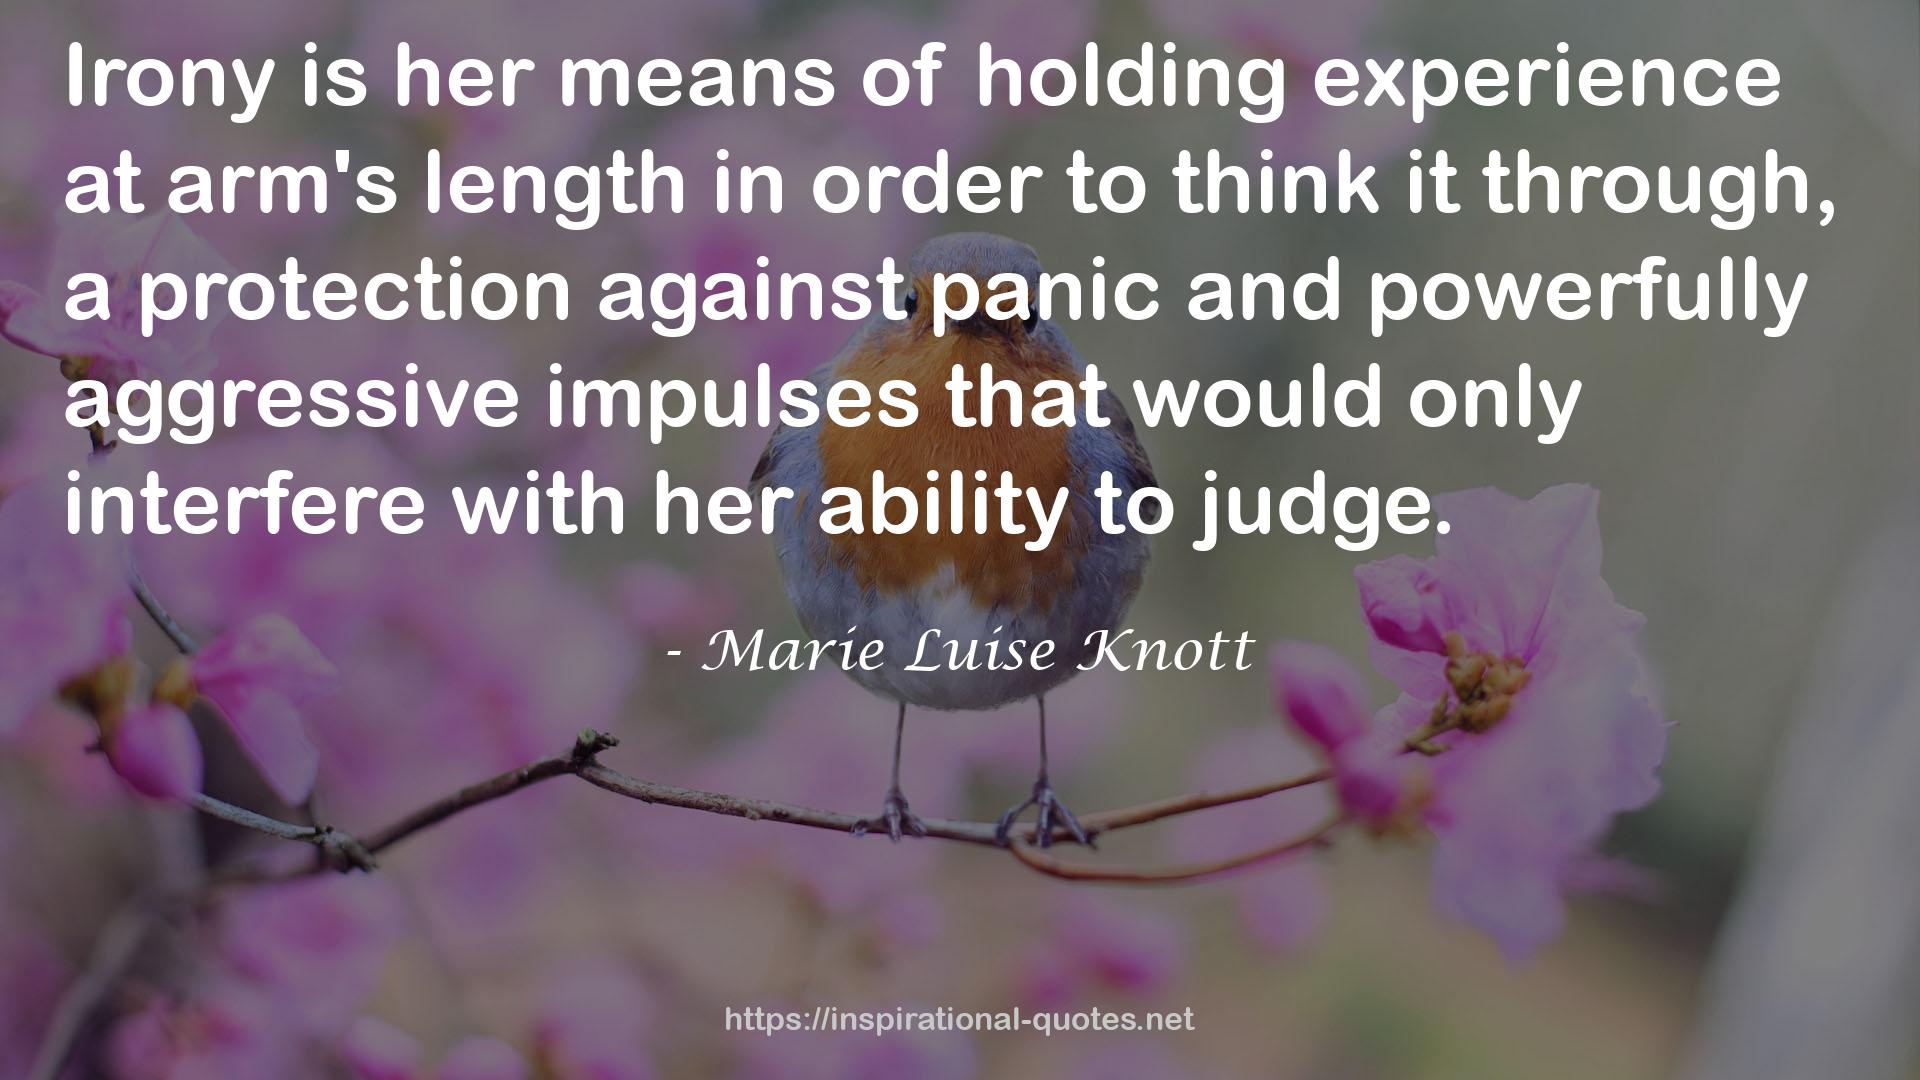 Marie Luise Knott QUOTES